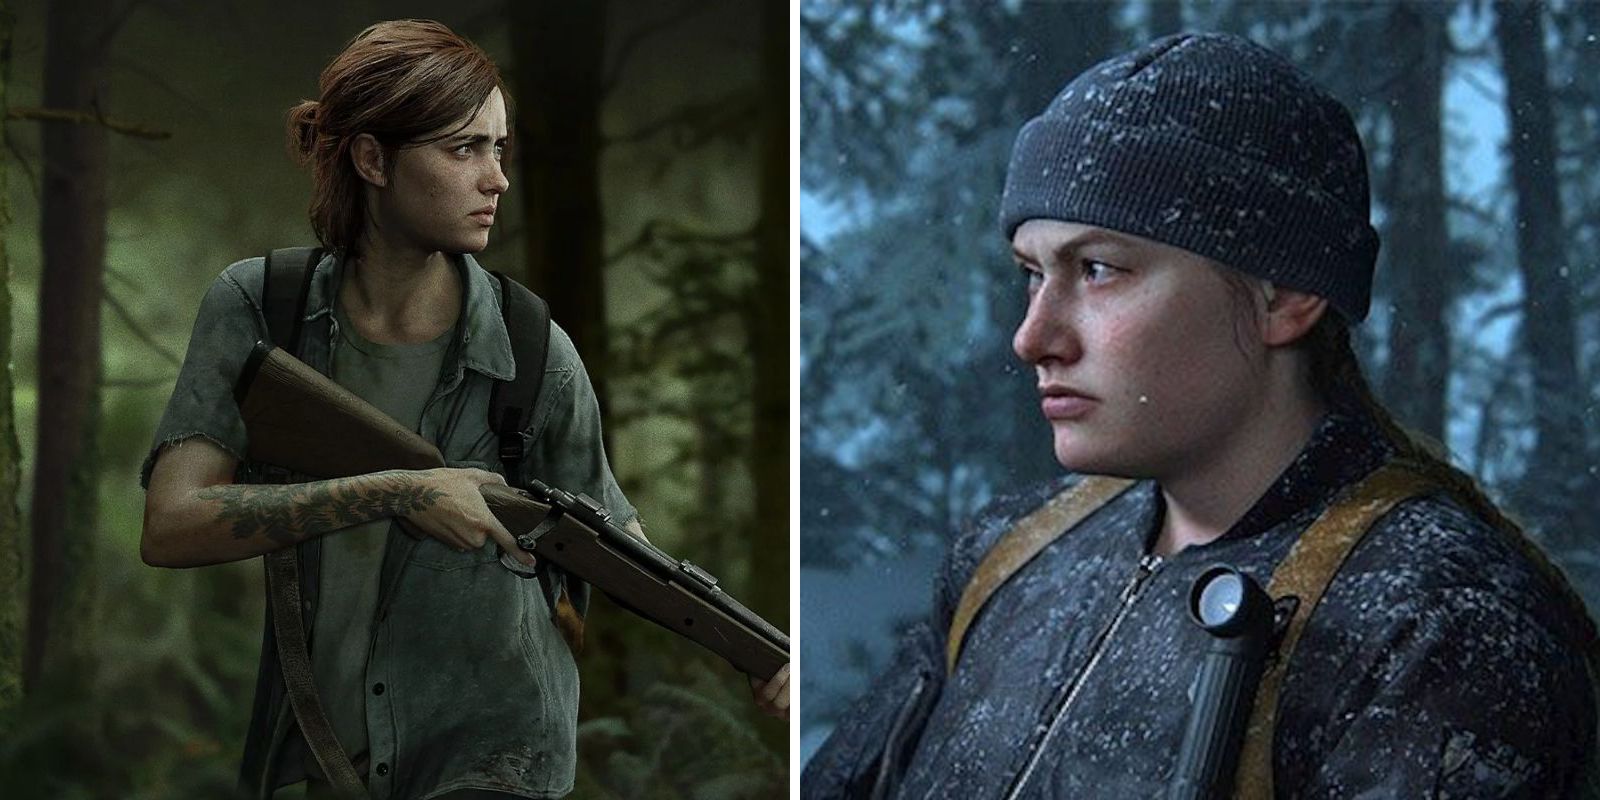 A split image of character art showing Ellie holding a rifle in a wooded area and a flipped in-game screenshot of Abby in snowy Jackson, Mississippi in The Last of Us Part II.